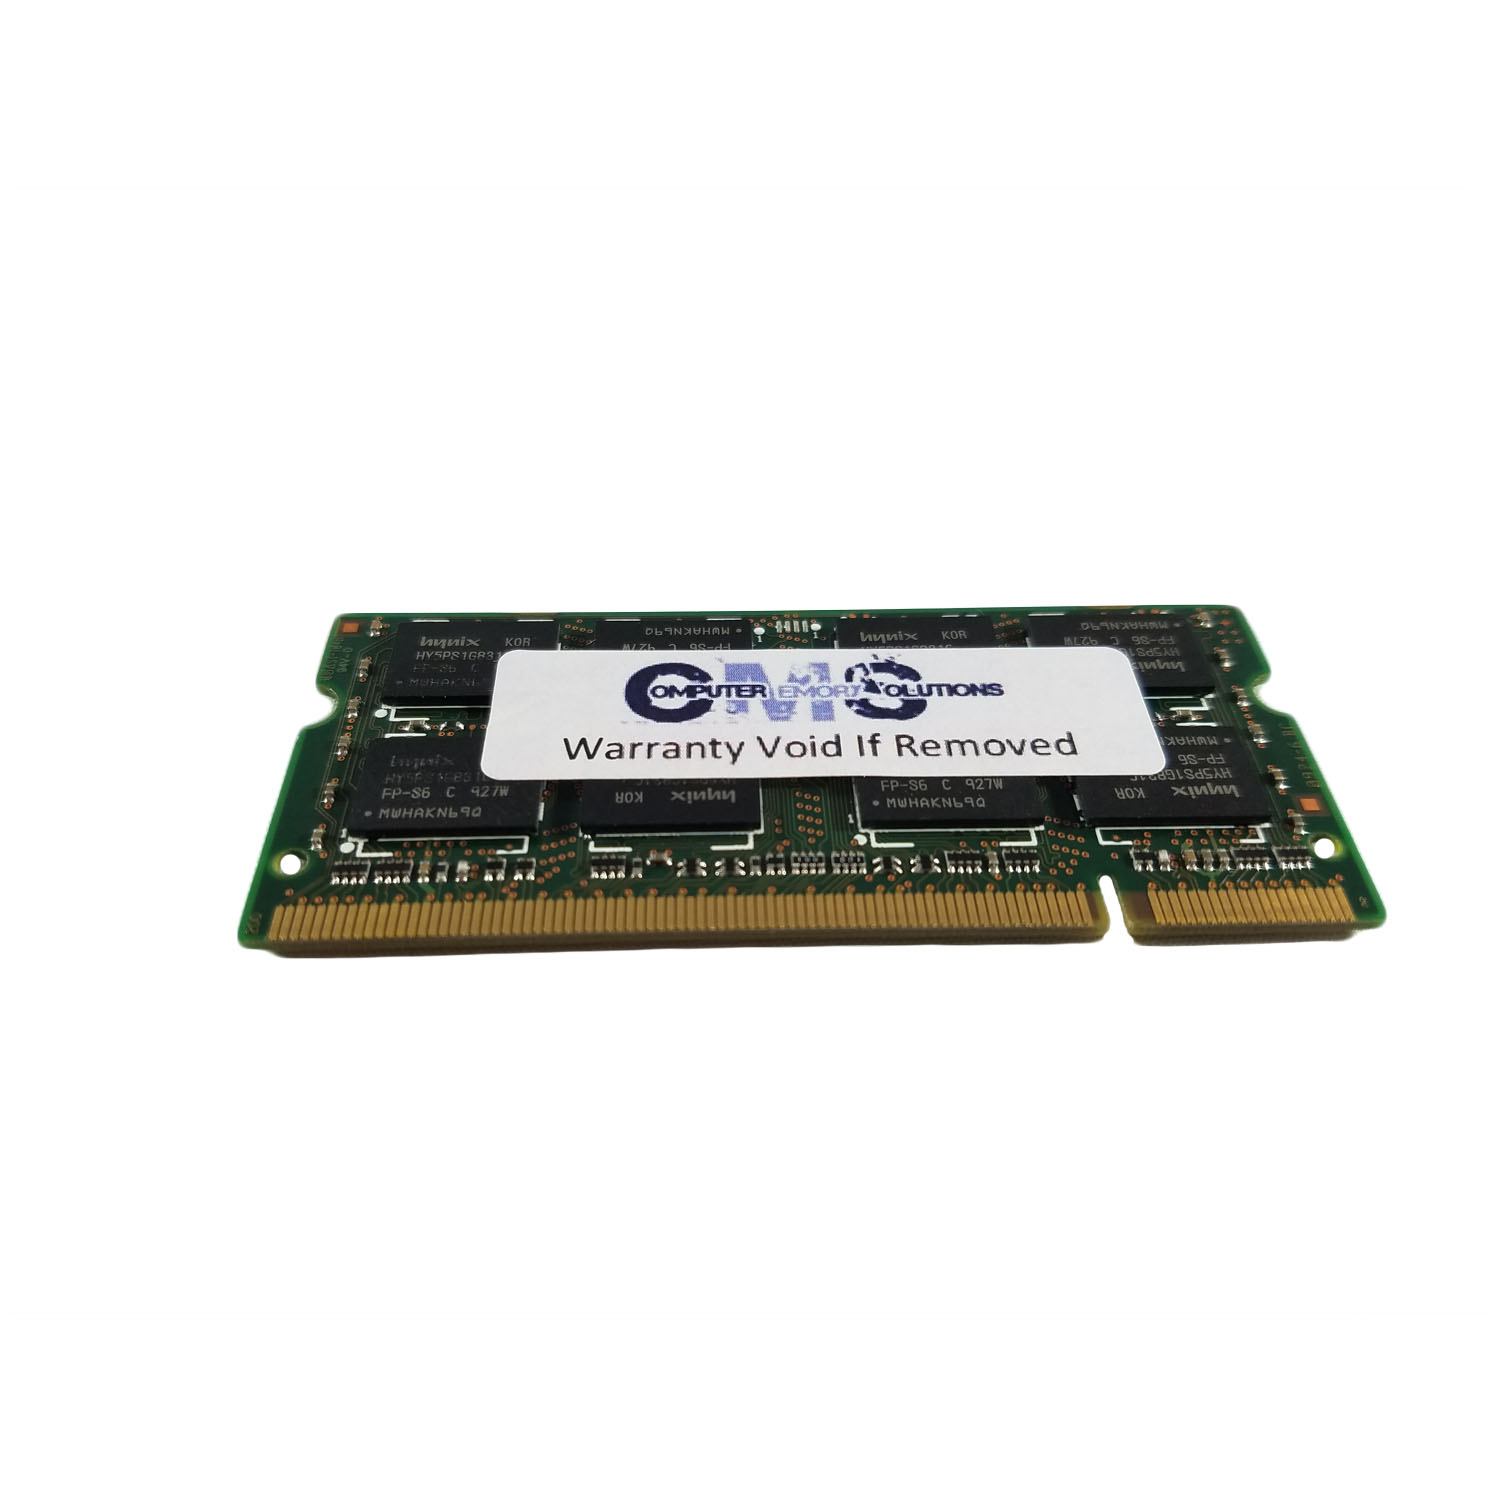 CMS 2GB (1X2GB) DDR2 5300 667MHZ NON ECC SODIMM Memory Ram Upgrade Compatible with Apple® Macbook Pro "Core 2 Duo" 2.33 17" Notebook - A38 - image 2 of 2